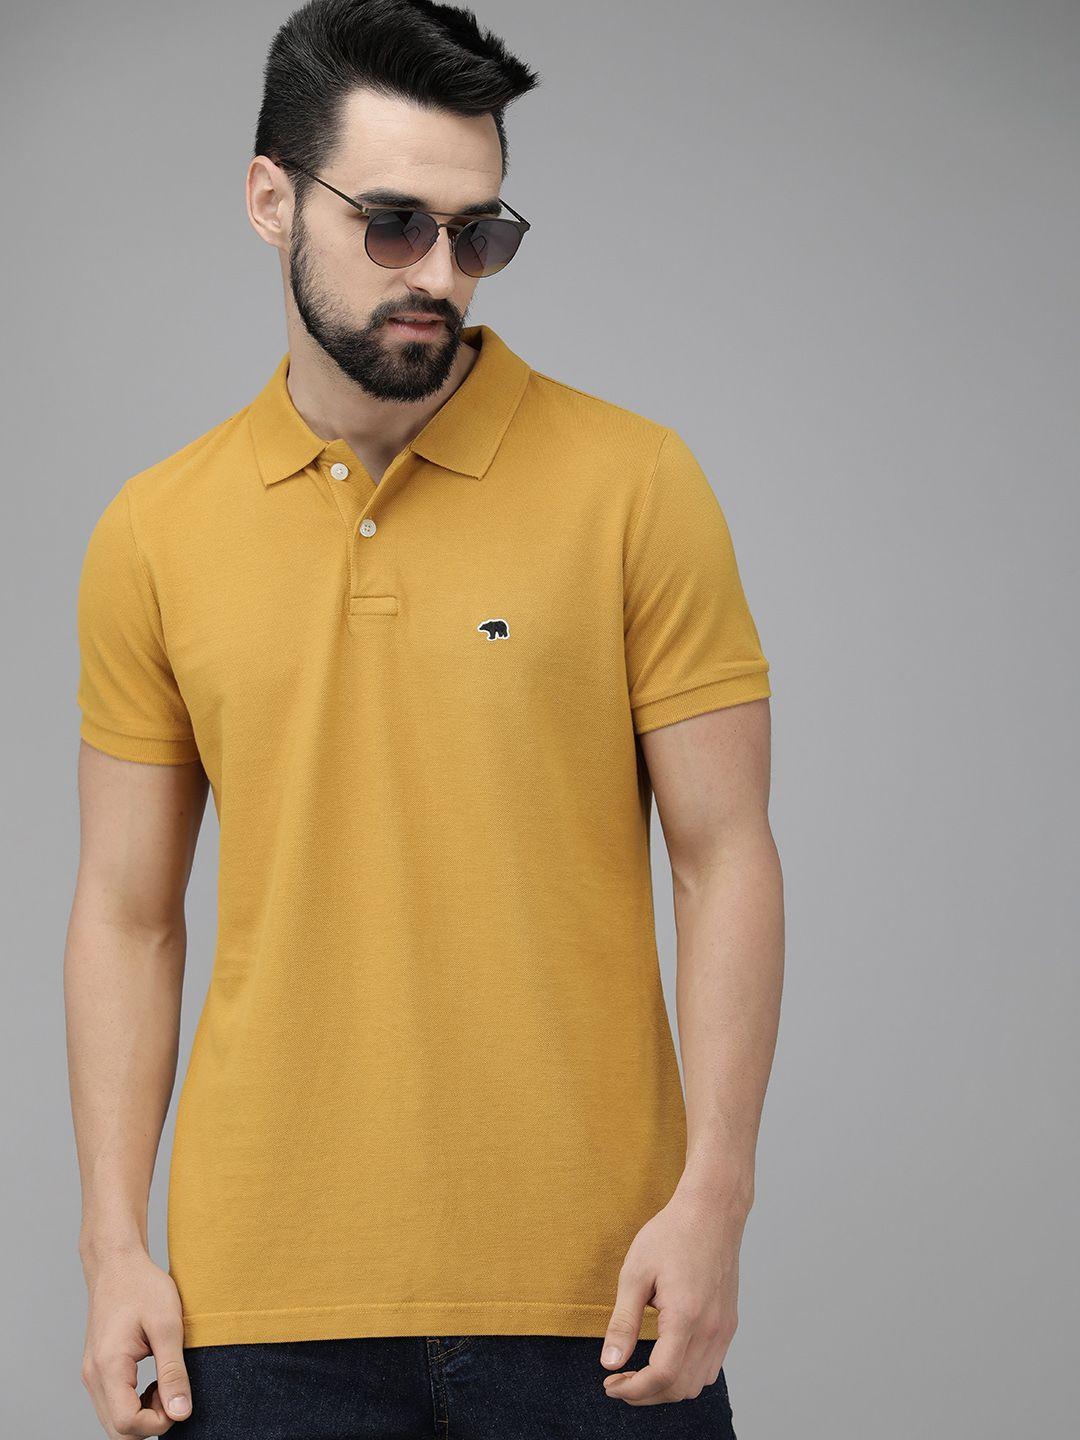 the-bear-house-men-mustard-yellow-polo-collar-pure-cotton-slim-fit-t-shirt